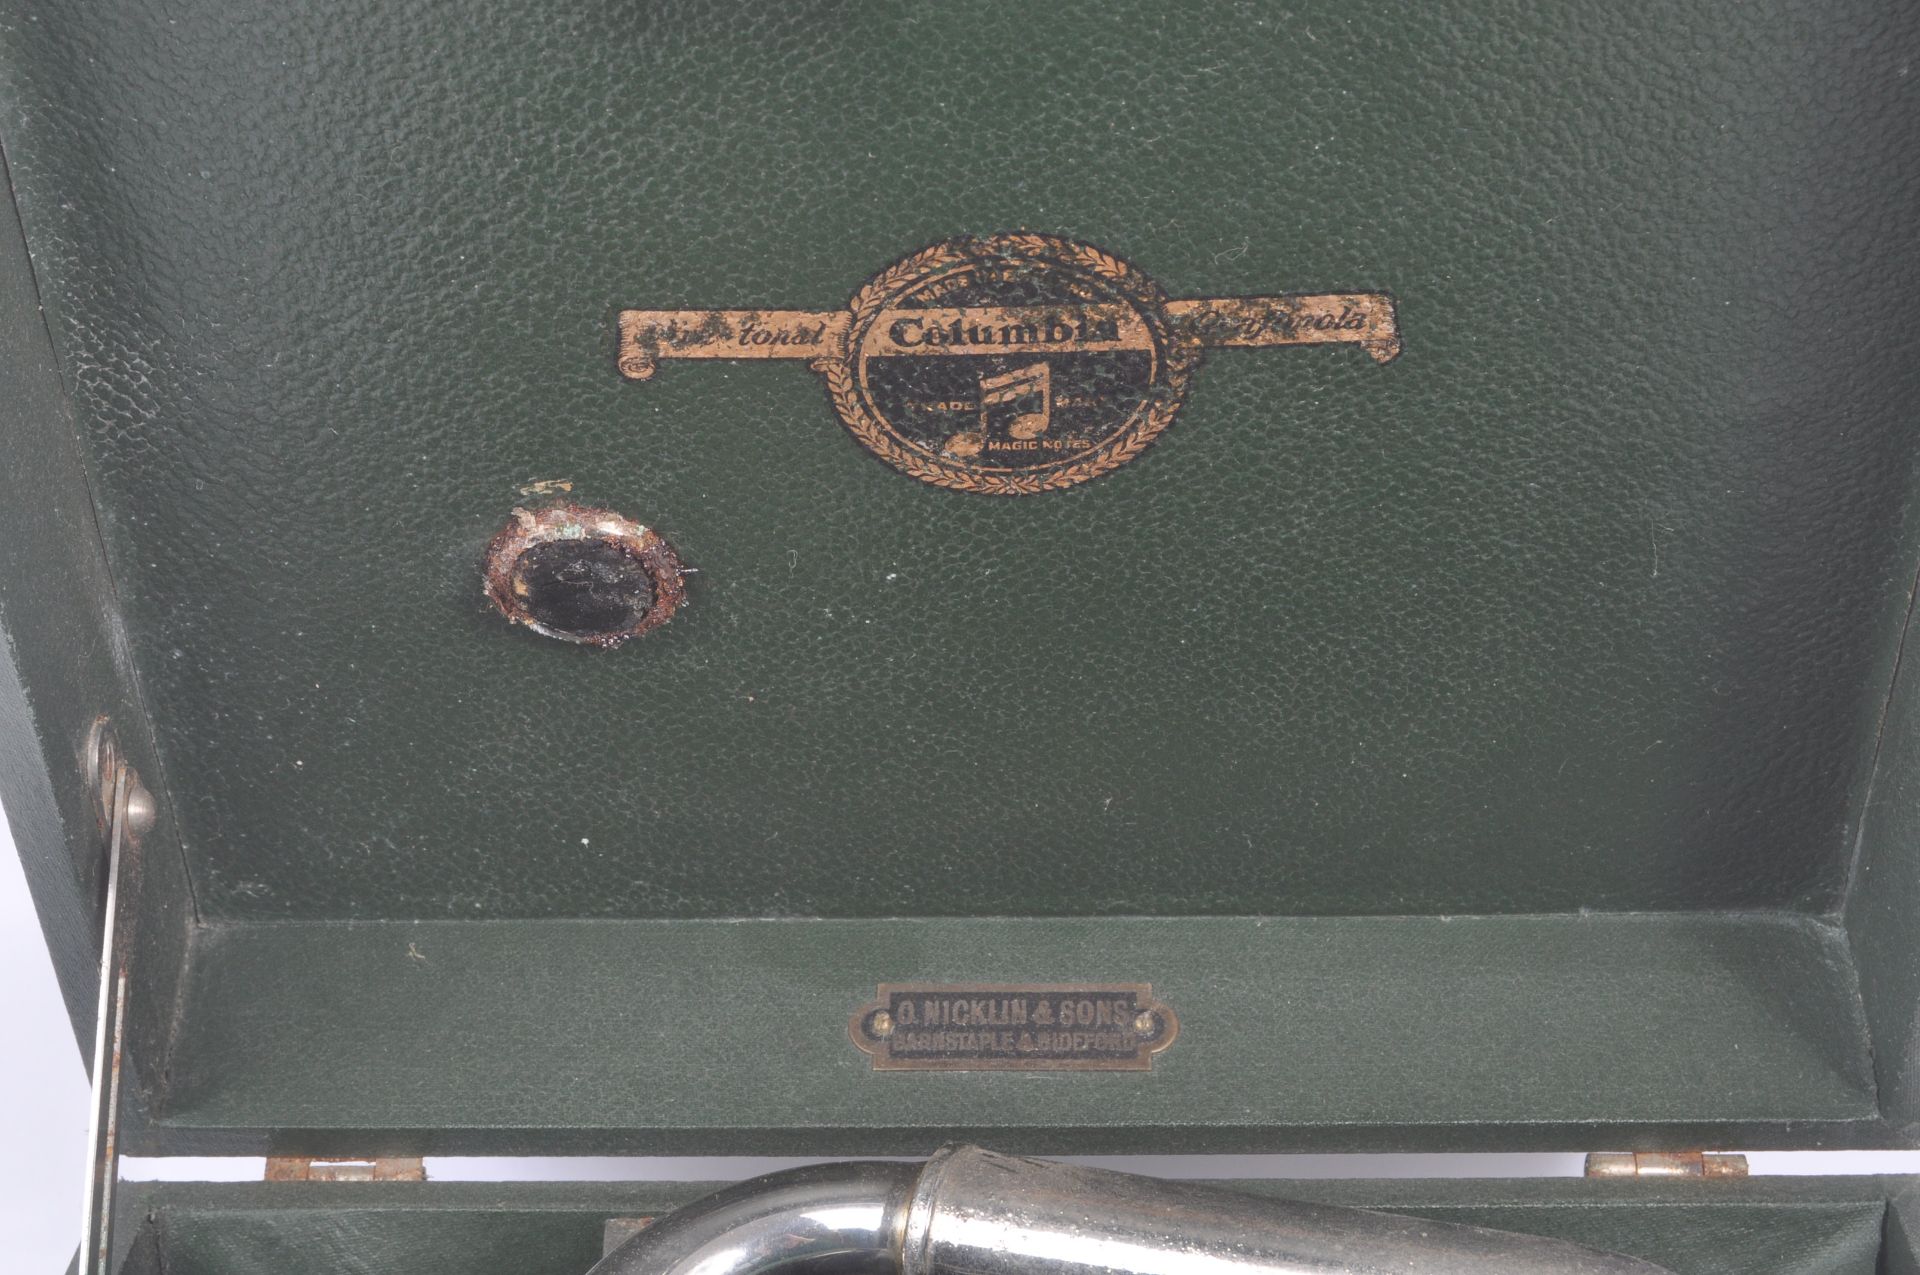 TWO VINTAGE 20TH CENTURY GRAMOPHONE RECORD PLAYERS - Image 7 of 8